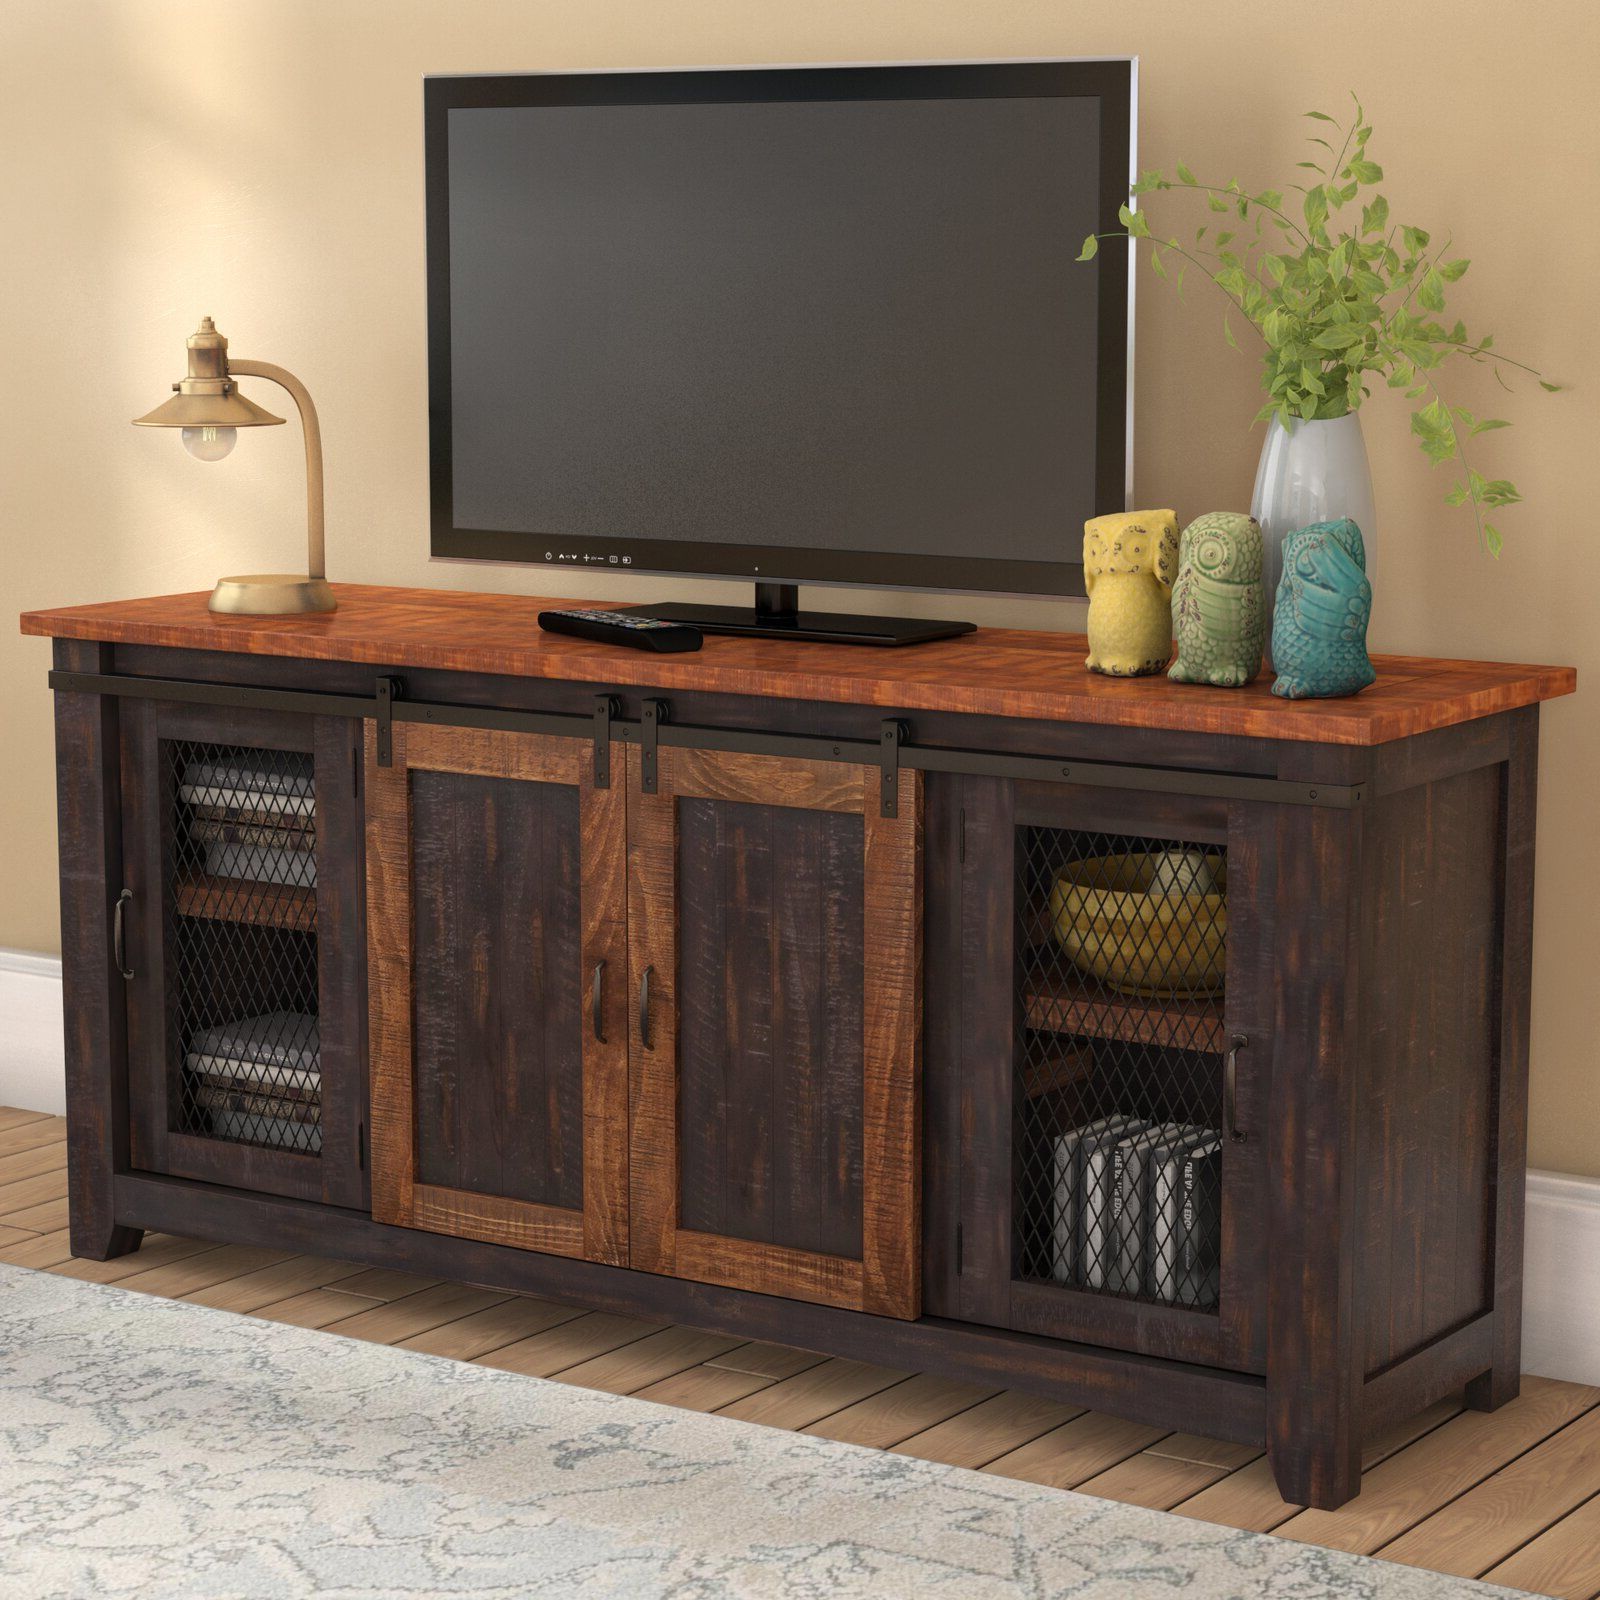 Belen Tv Stand For Tvs Up To 70" & Reviews | Joss & Main Throughout Giltner Solid Wood Tv Stands For Tvs Up To 65" (Gallery 5 of 20)